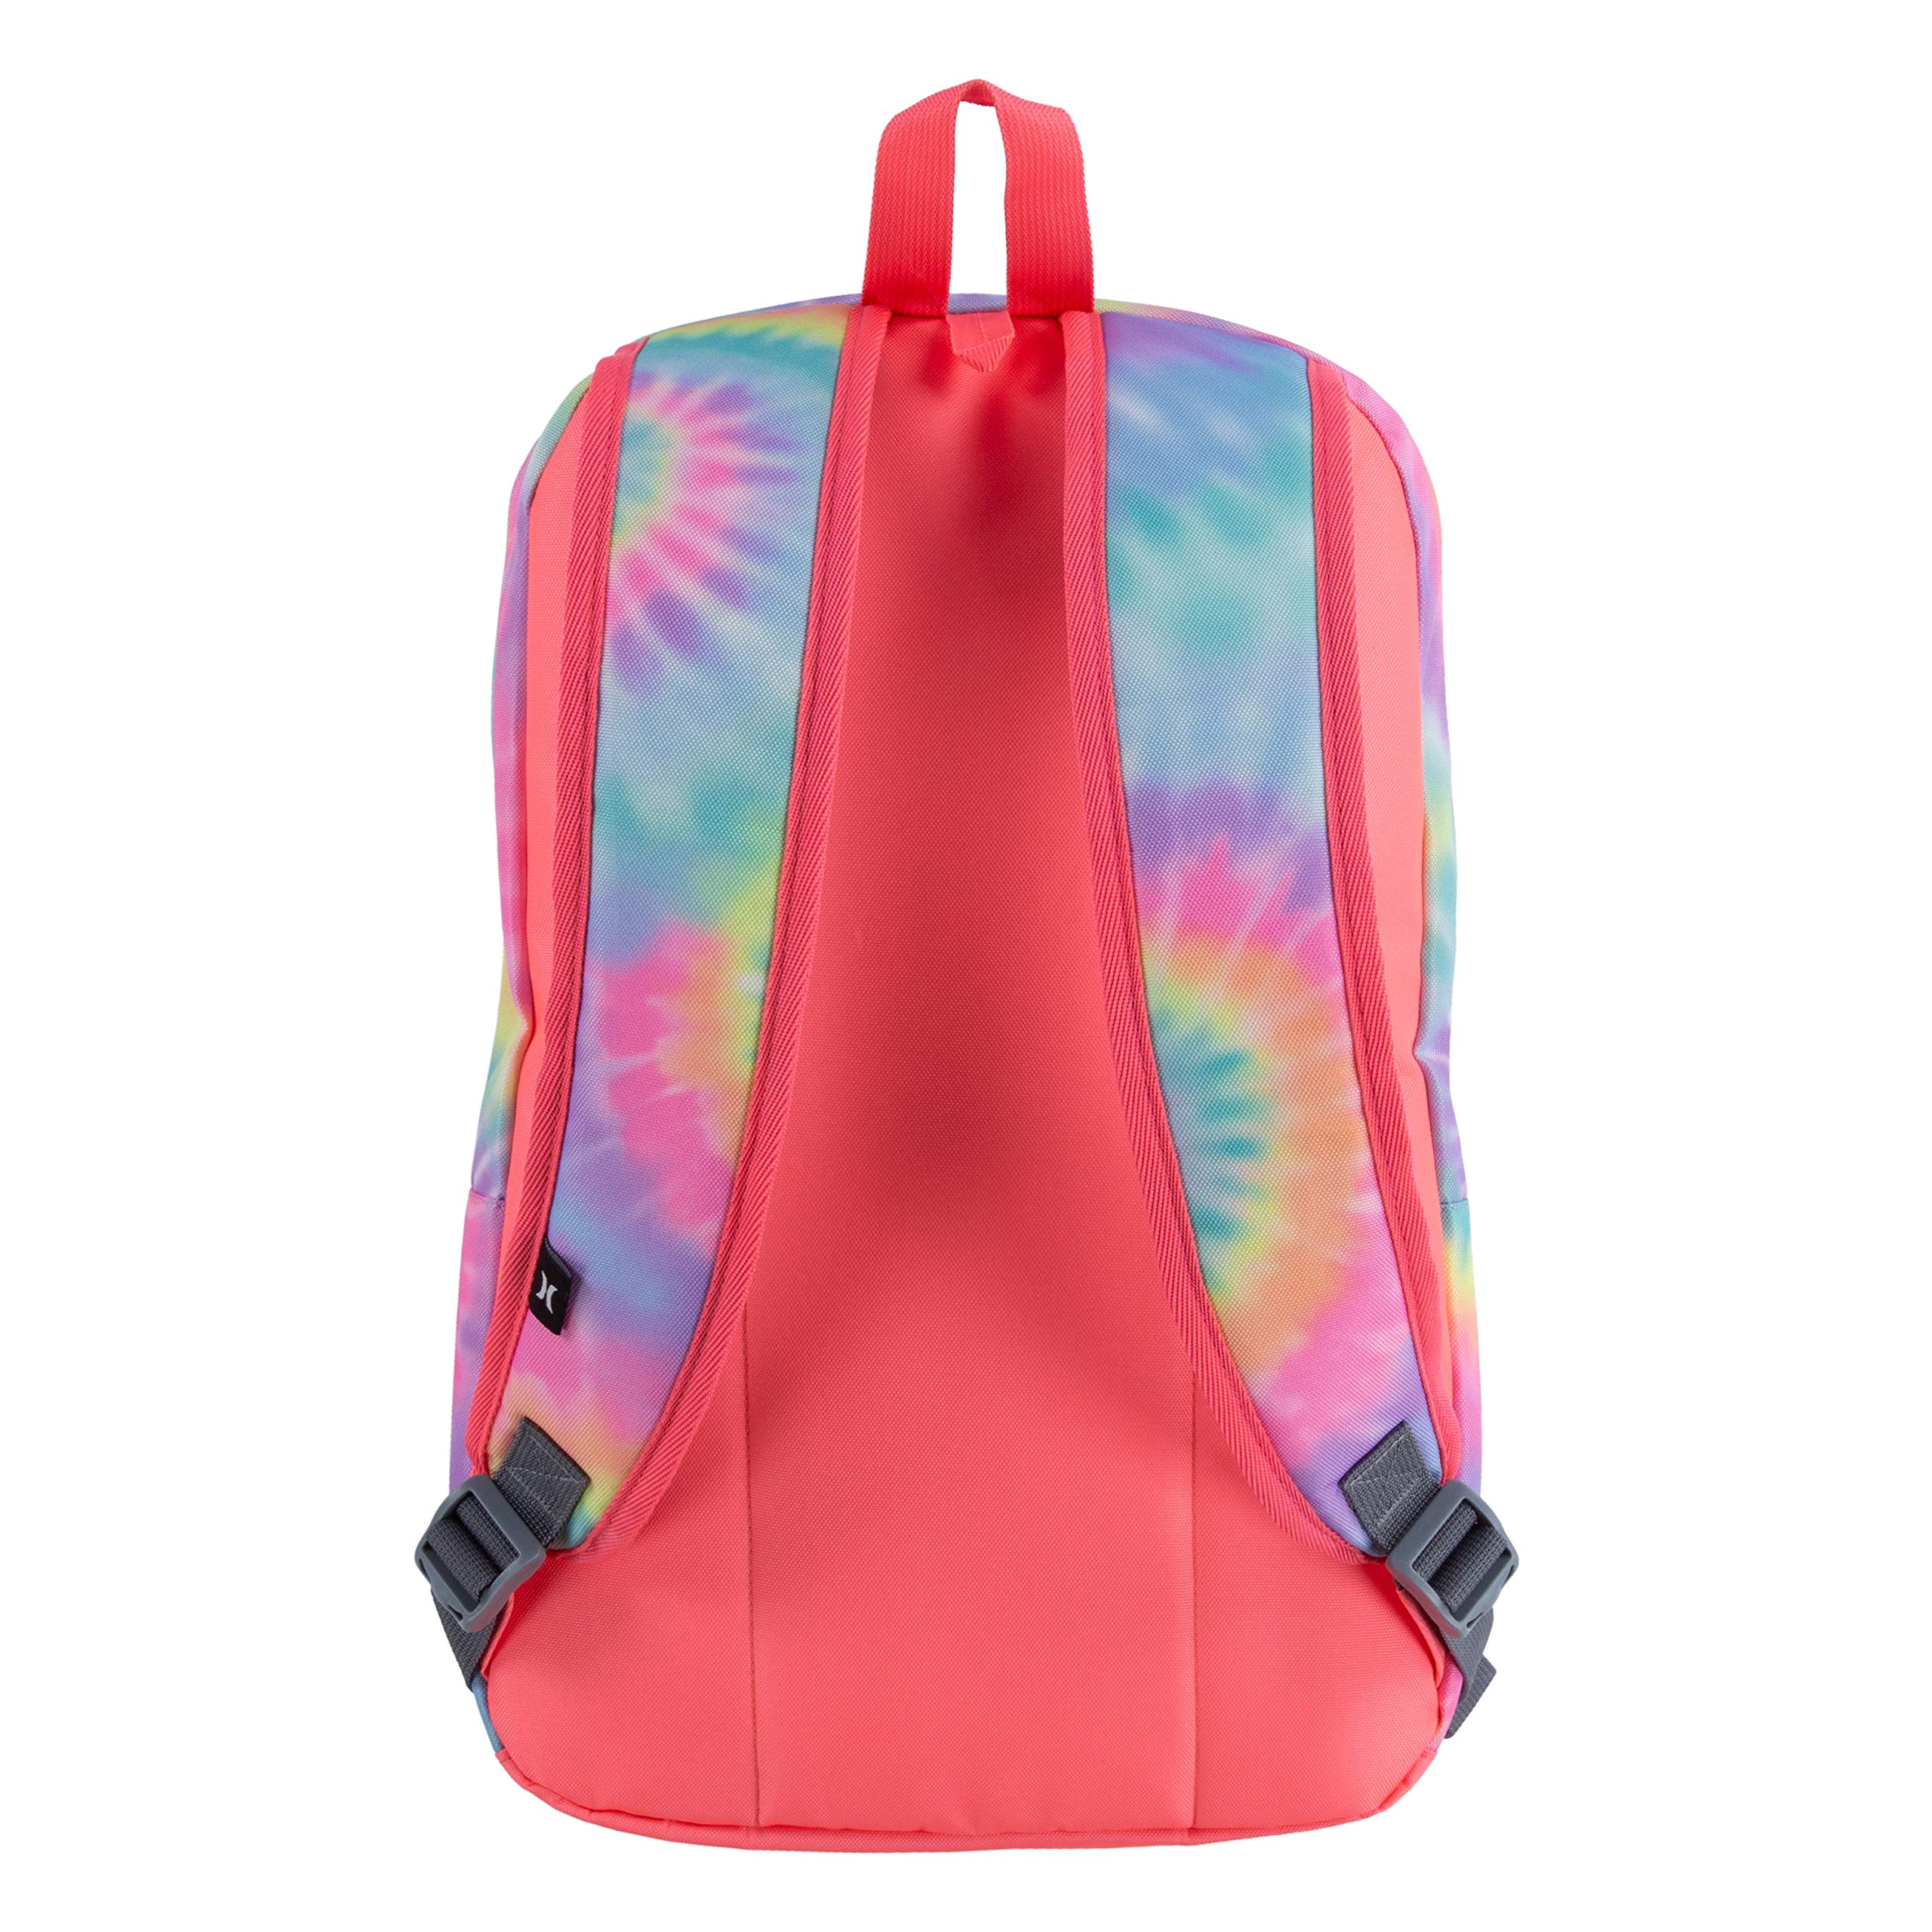 Hurley Unisex-Adults One and Only Backpack, Multicolor, Large